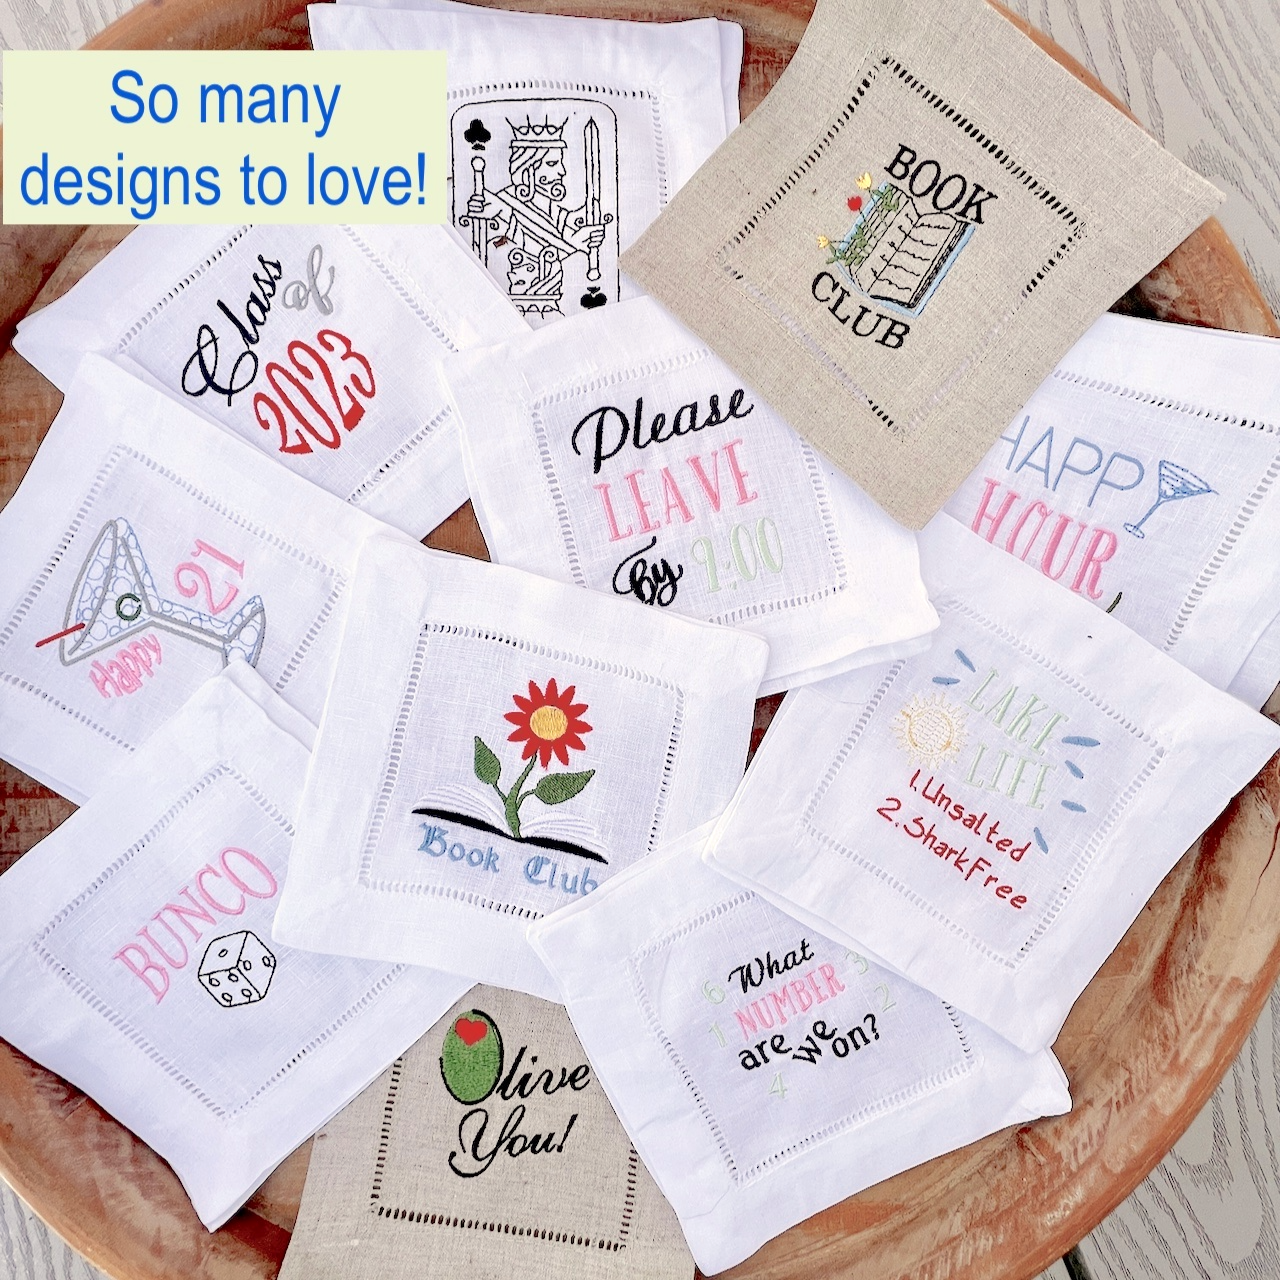 The Best Cloth Napkins in 2023, According to Domino Editors